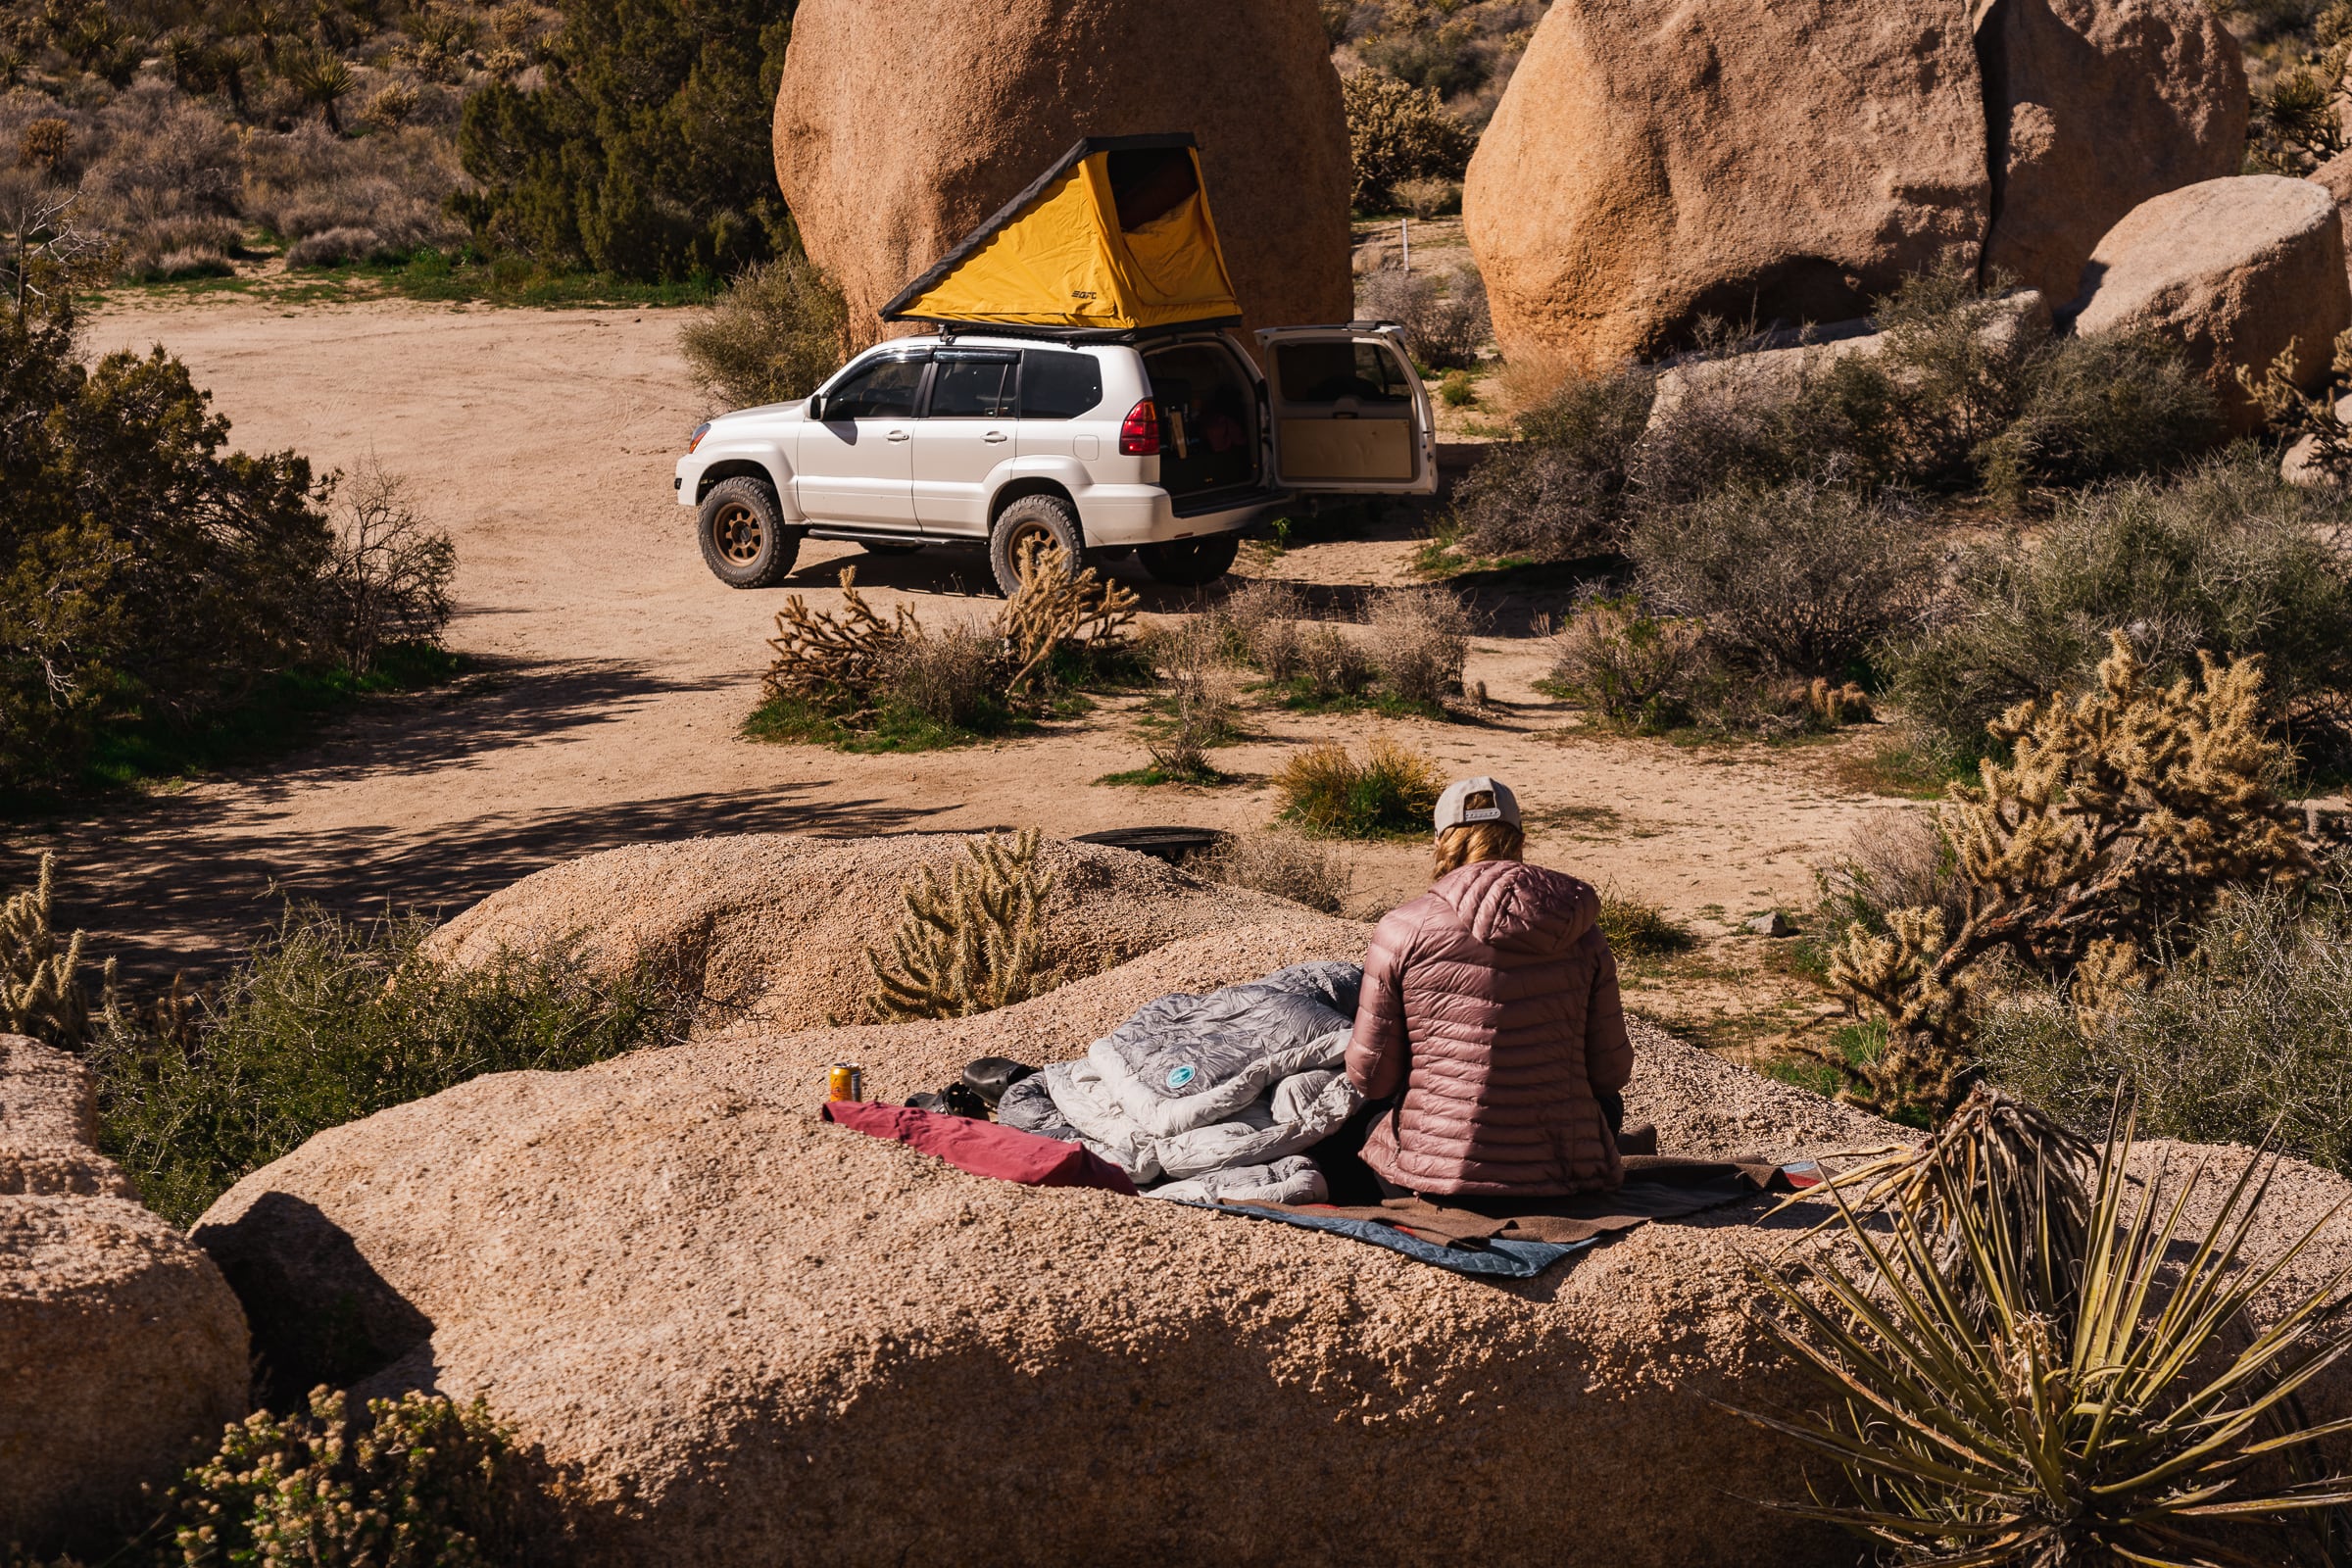 A woman is knitting on a huge rock, set amongst a boulder field, with cactus and other flora surrounding the frame. A 4x4 Lexus GX470 sits off in the distance with a GoFastCampers Superlite rooftop tent open above it, next to its own impressively tall boulder.